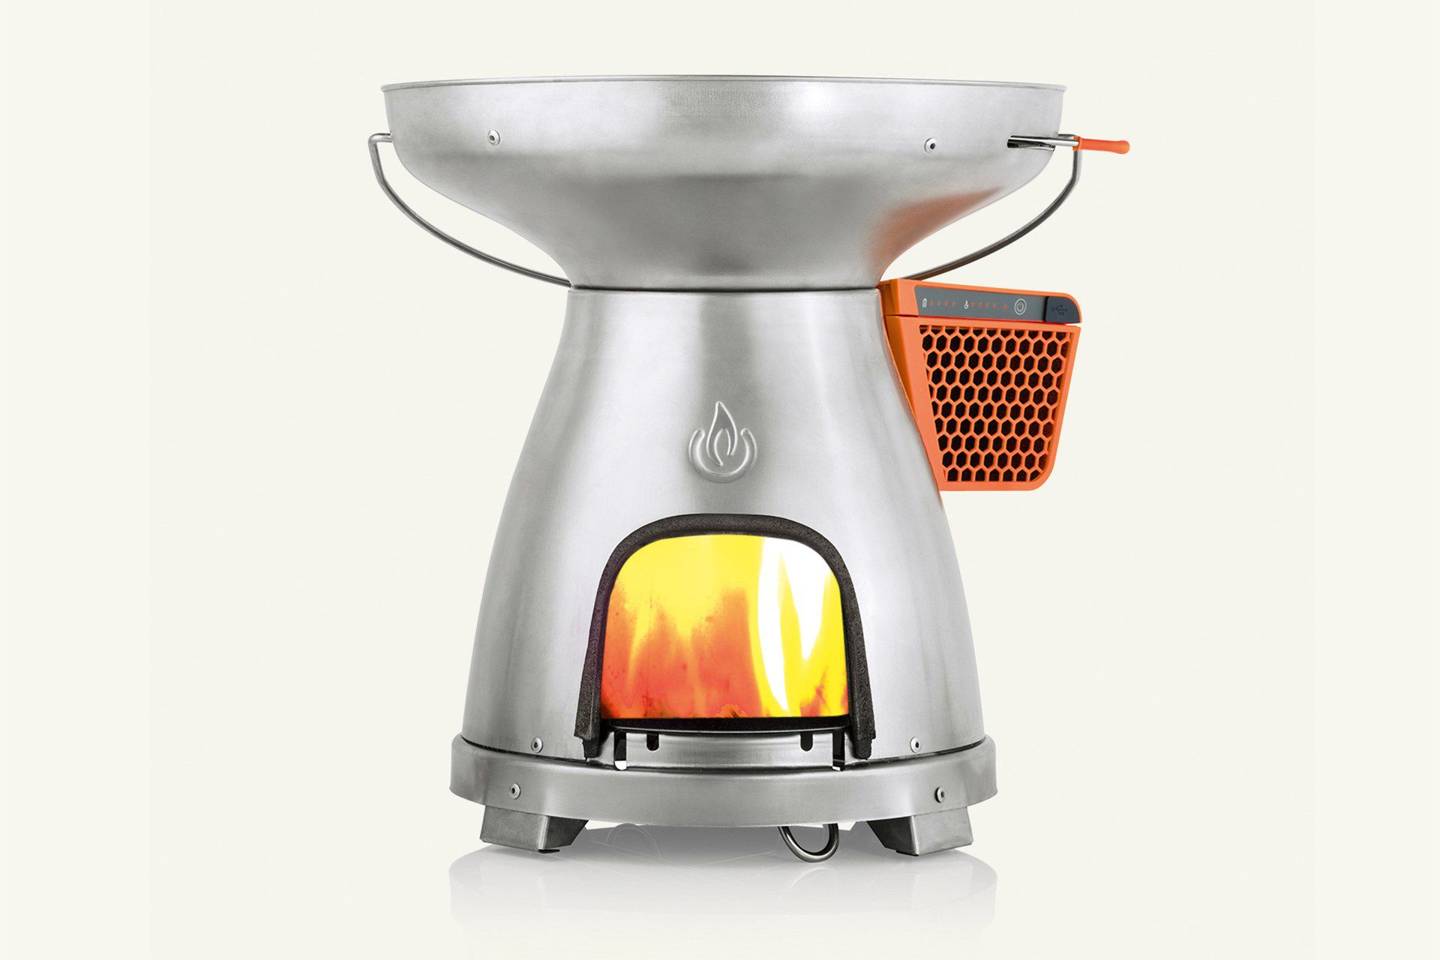  Best Wood Burning Camp Stove with Simple Decor